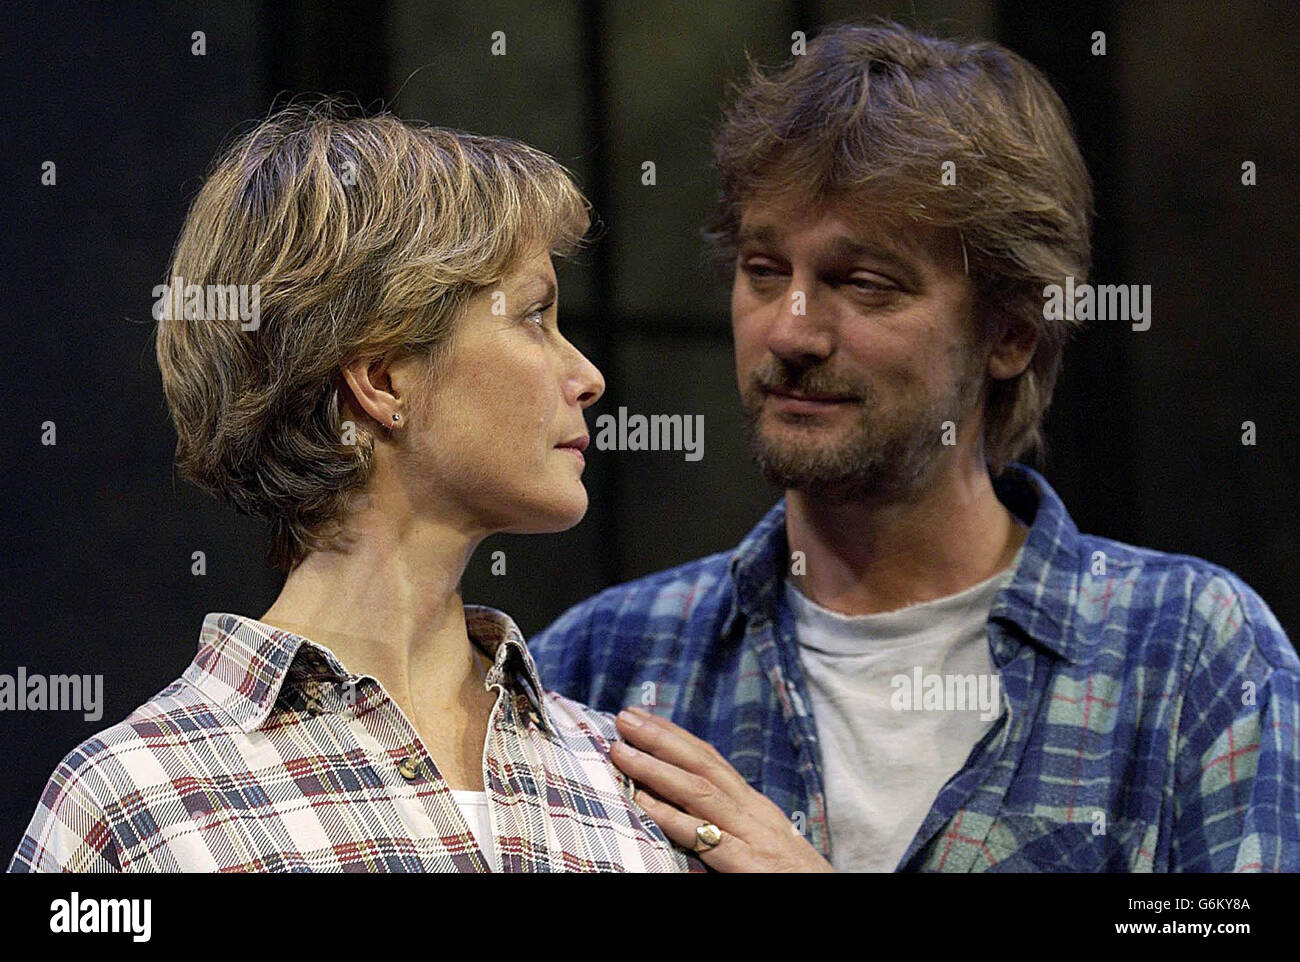 Actors Jenny Seagrove and Simon Shepherd during a photocall for play 'The Secret Rapture', written by David Hare, at the Lyric Theatre, Shaftsbury Avenue in central London. Stock Photo